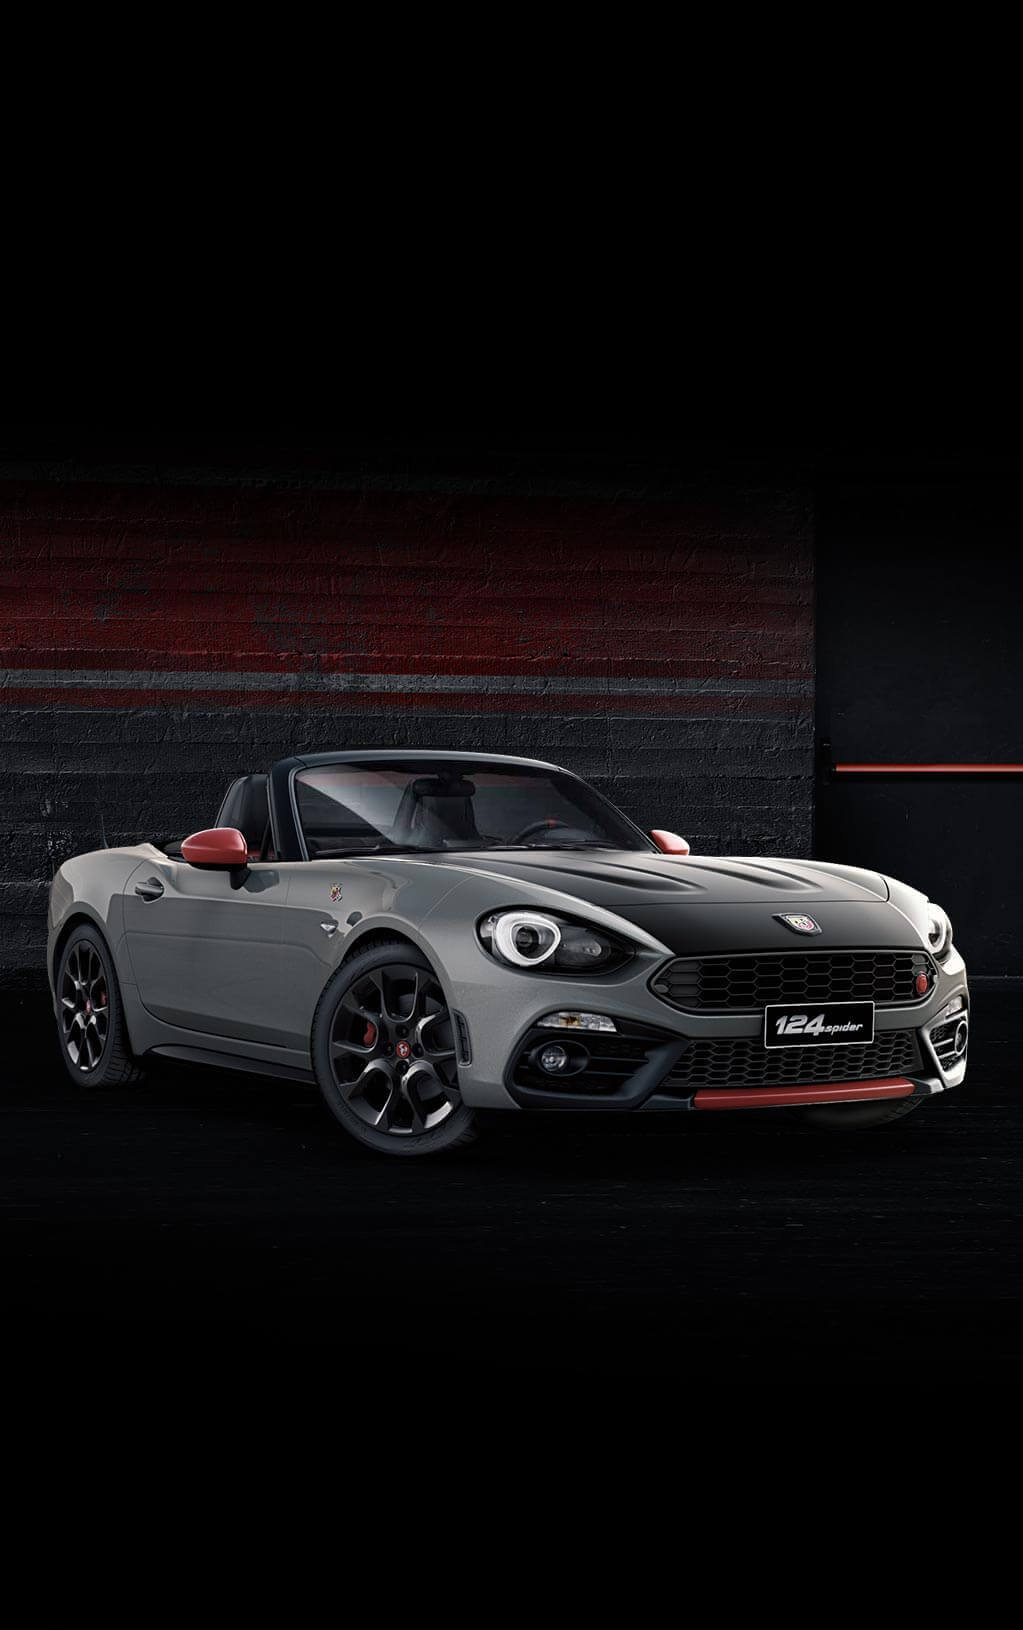 Abarth 124 Spider Turismo - Customize It Your Way | Abarth